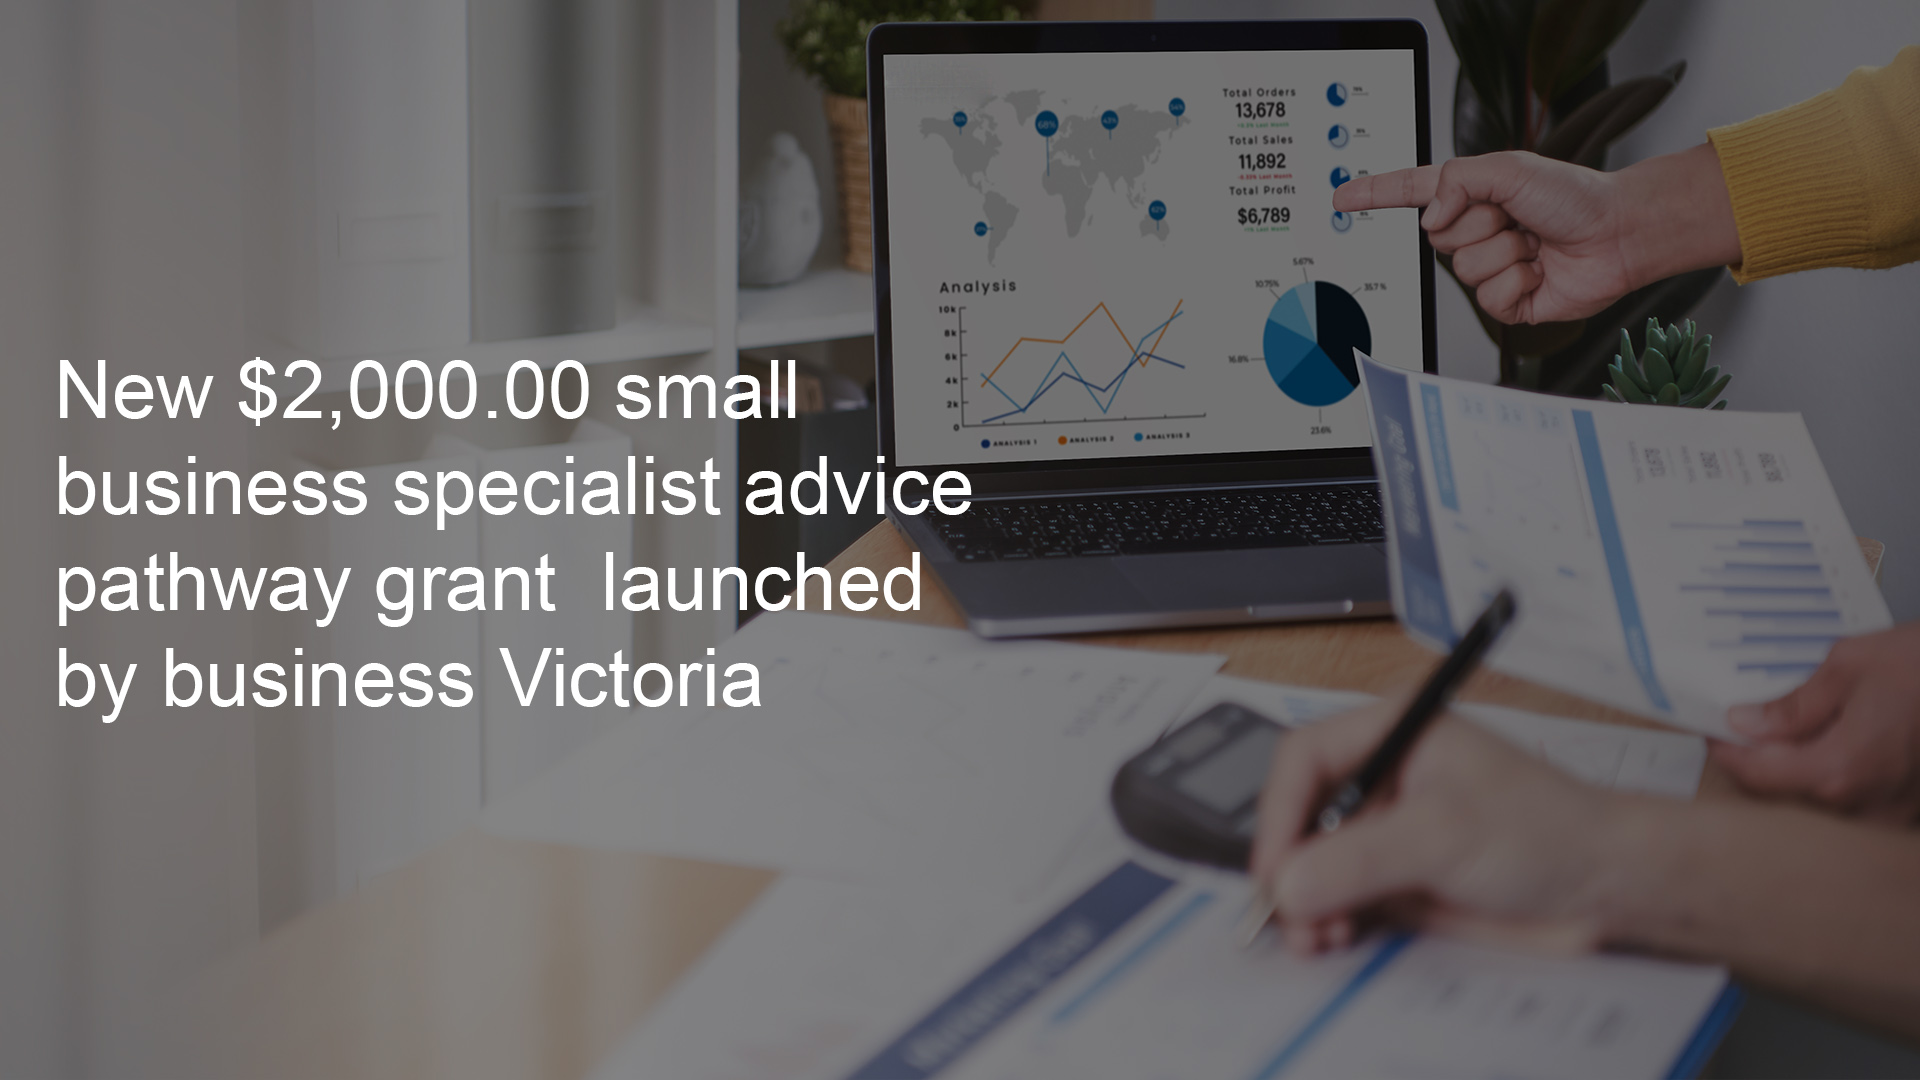 Small Business specialist advice pathway program